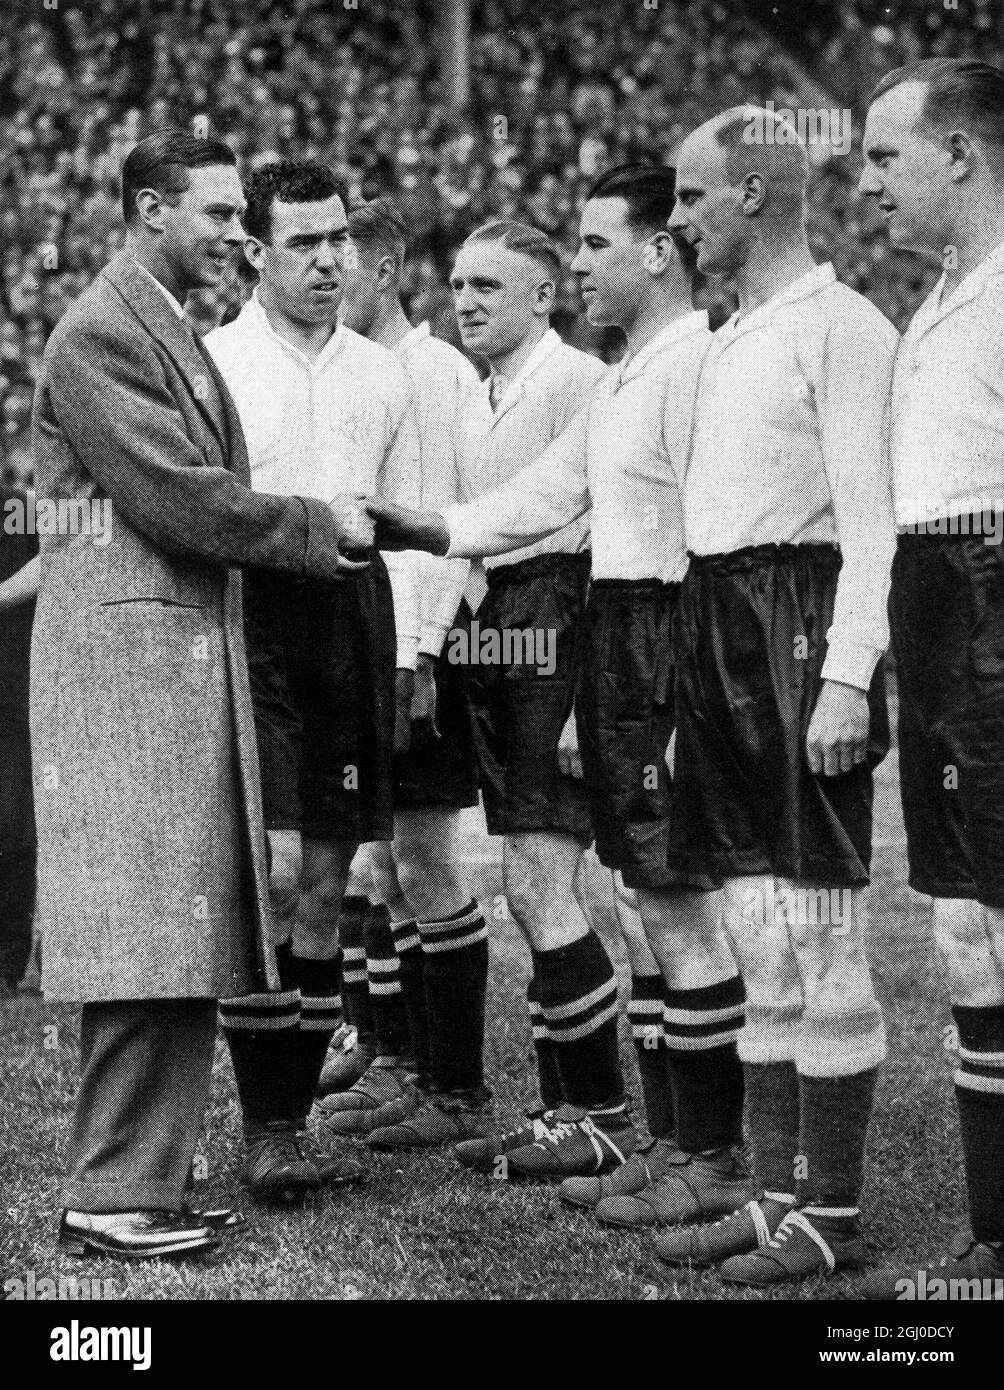 George VI shaking hands with Dixie Dean, captain of Everton before the FA Cup final. Stock Photo